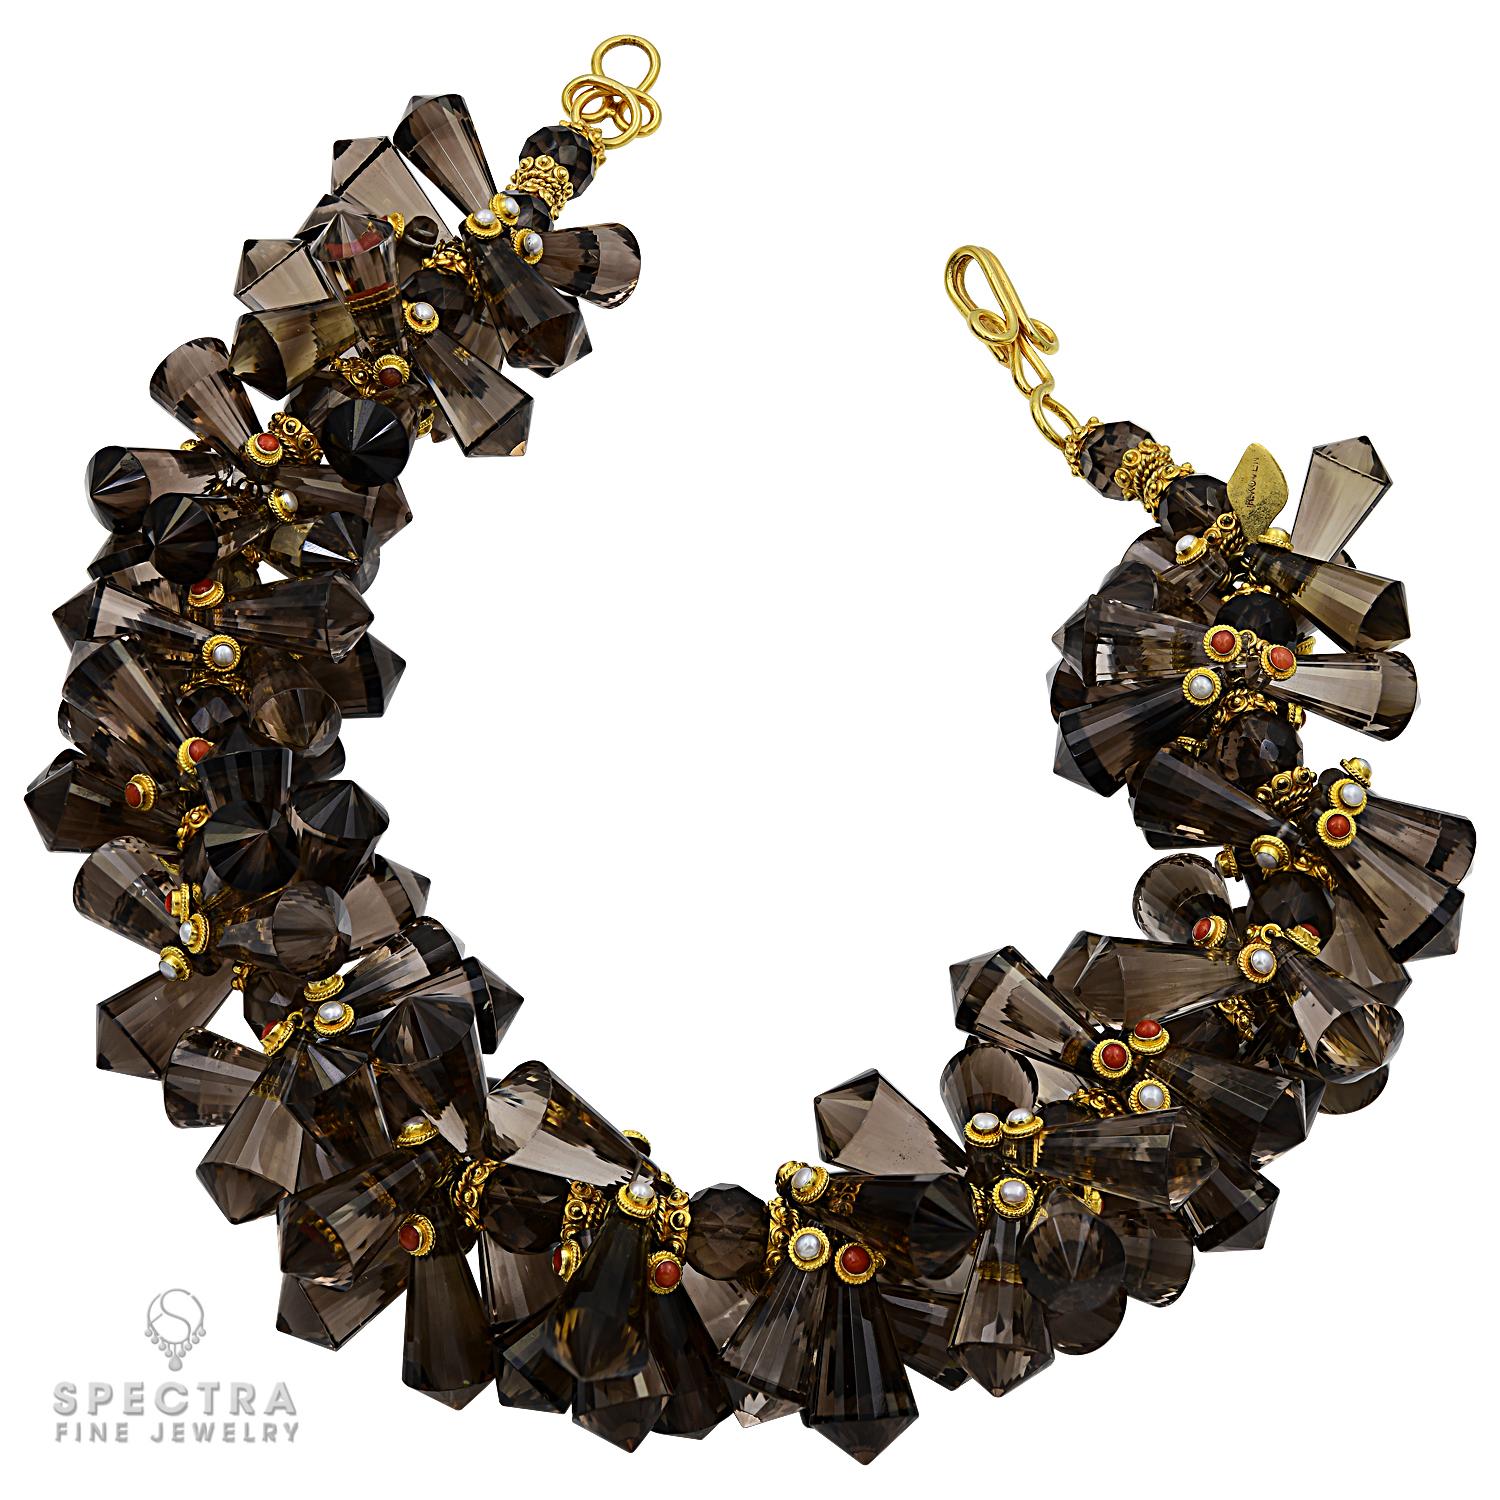 A beaded necklace made of natural smokey topaz semi-precious stone. Total weight is 999 carats. 
The necklace is accented with coral and pearl cabochons set in 22kt yellow gold. 
Weight of the necklace is 250.00 g. 
Length 16 inches (40.64cm).